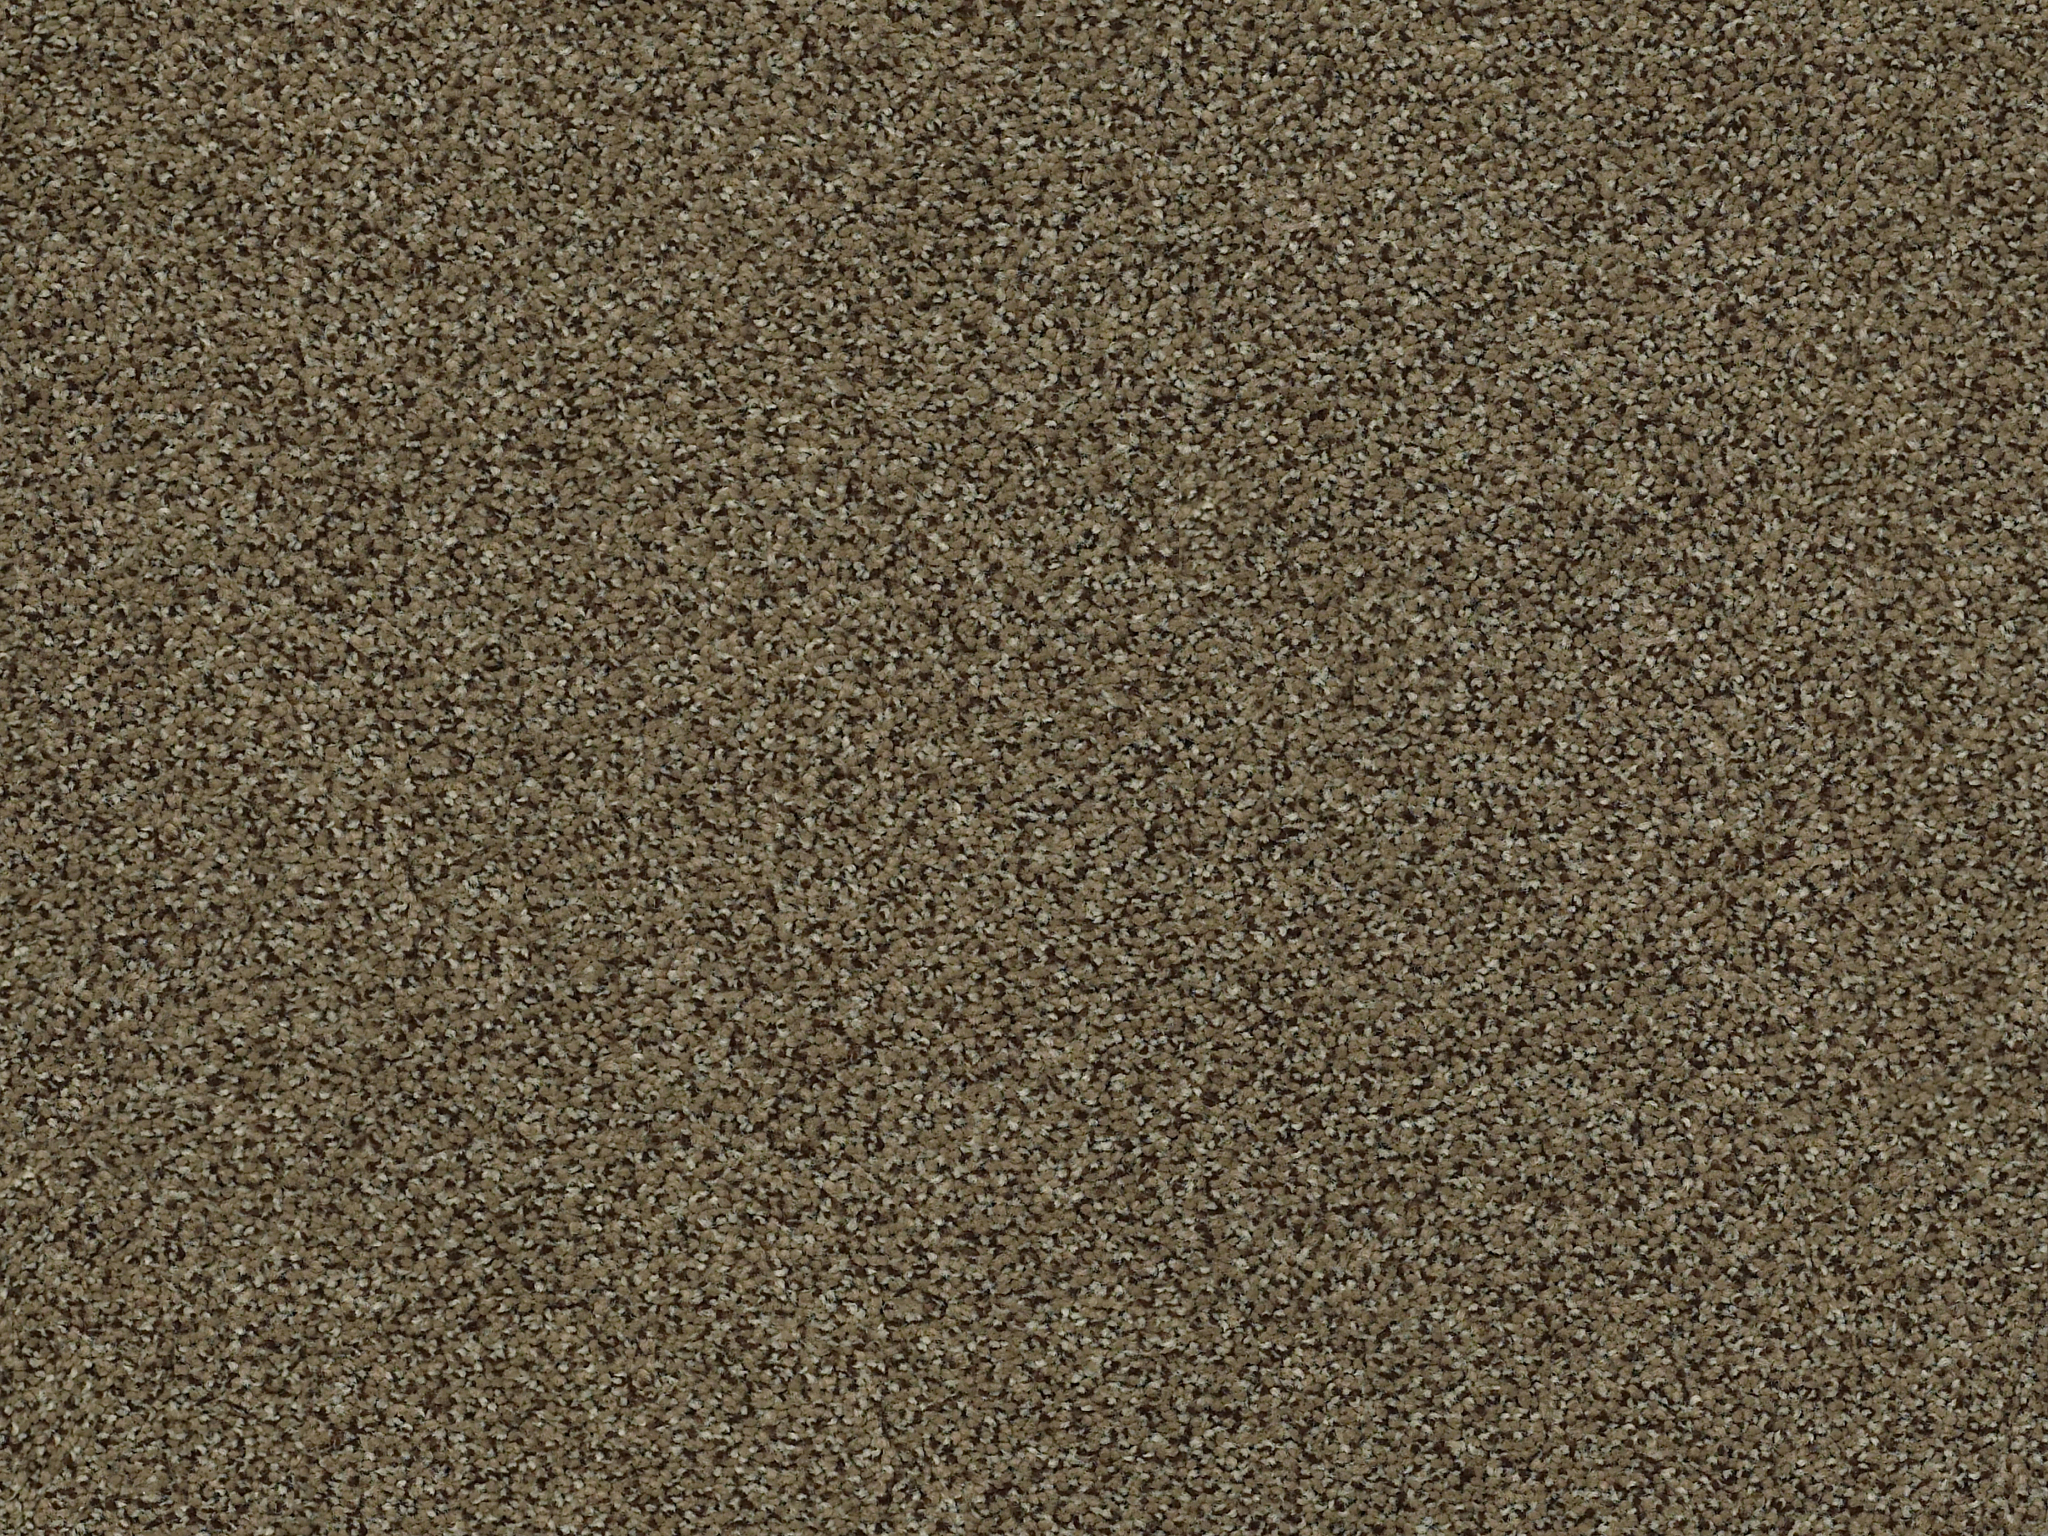 Serenity Cove Carpet - Hearth Zoomed Swatch Image